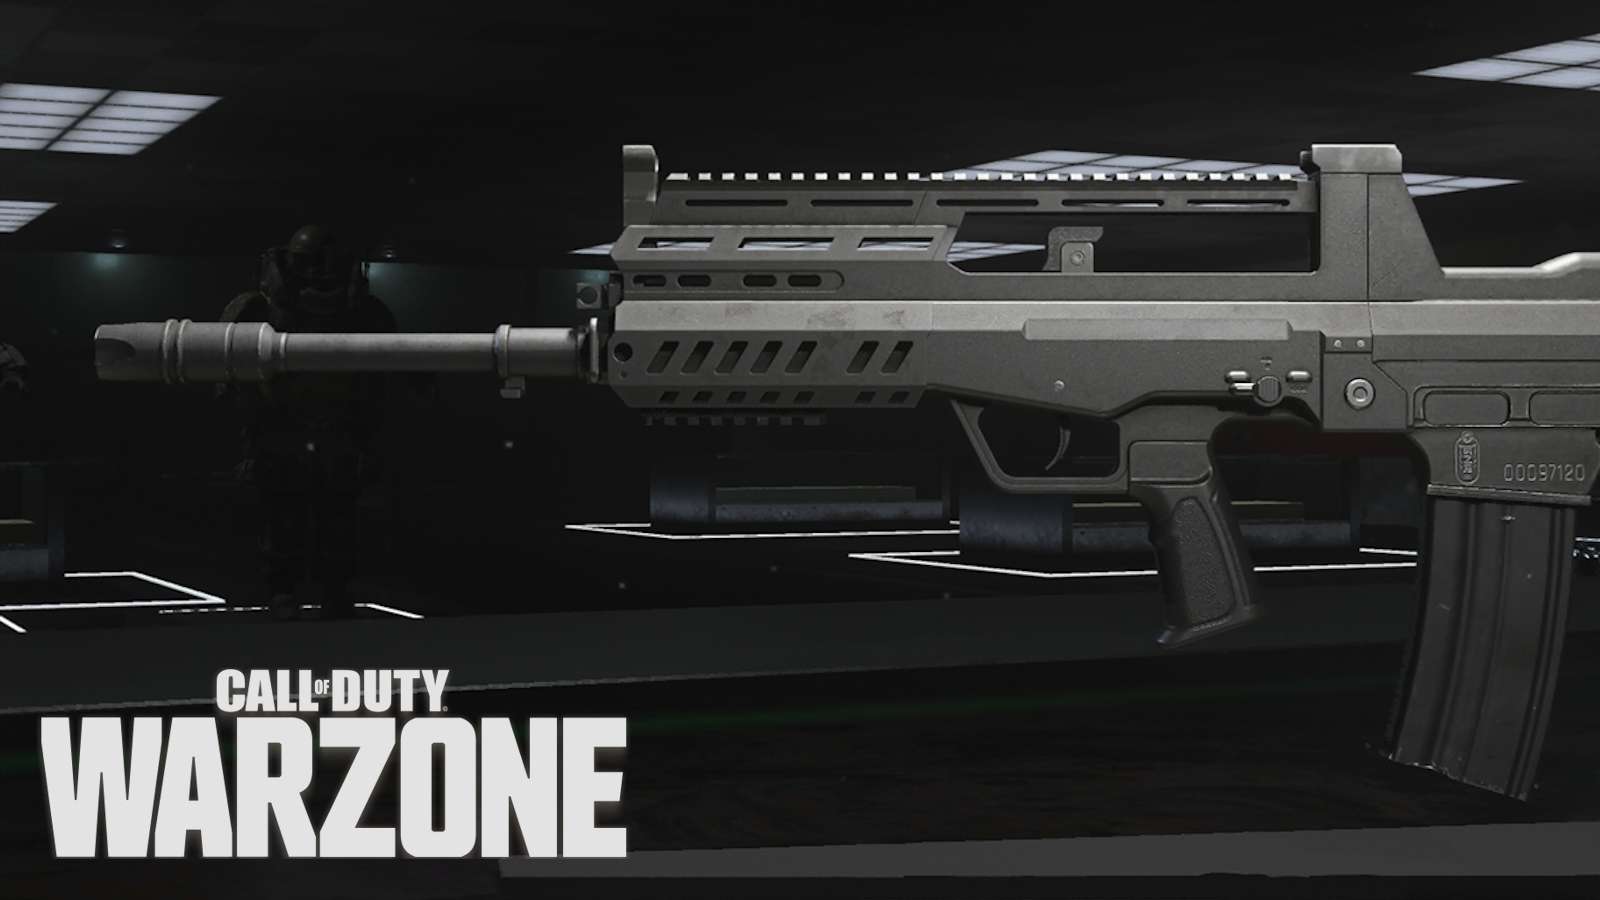 DG-58 assault rifle with Warzone logo.